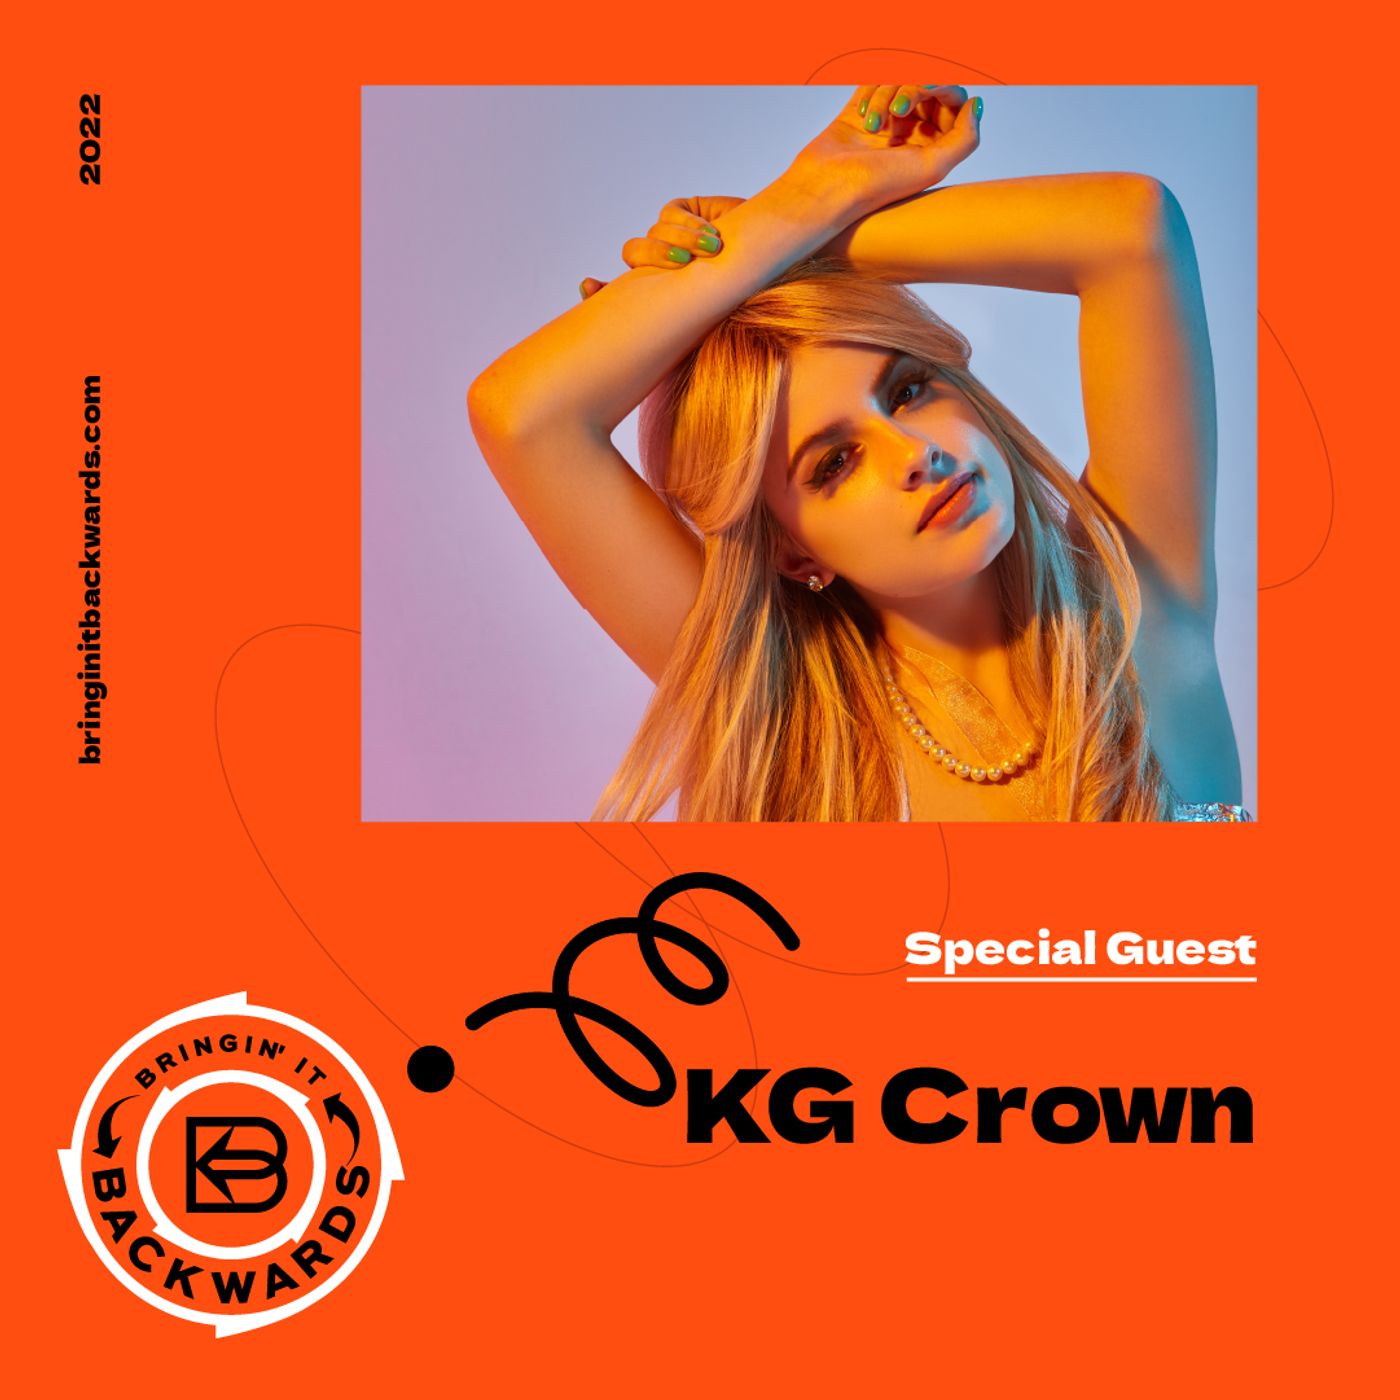 Interview with KG Crown Image